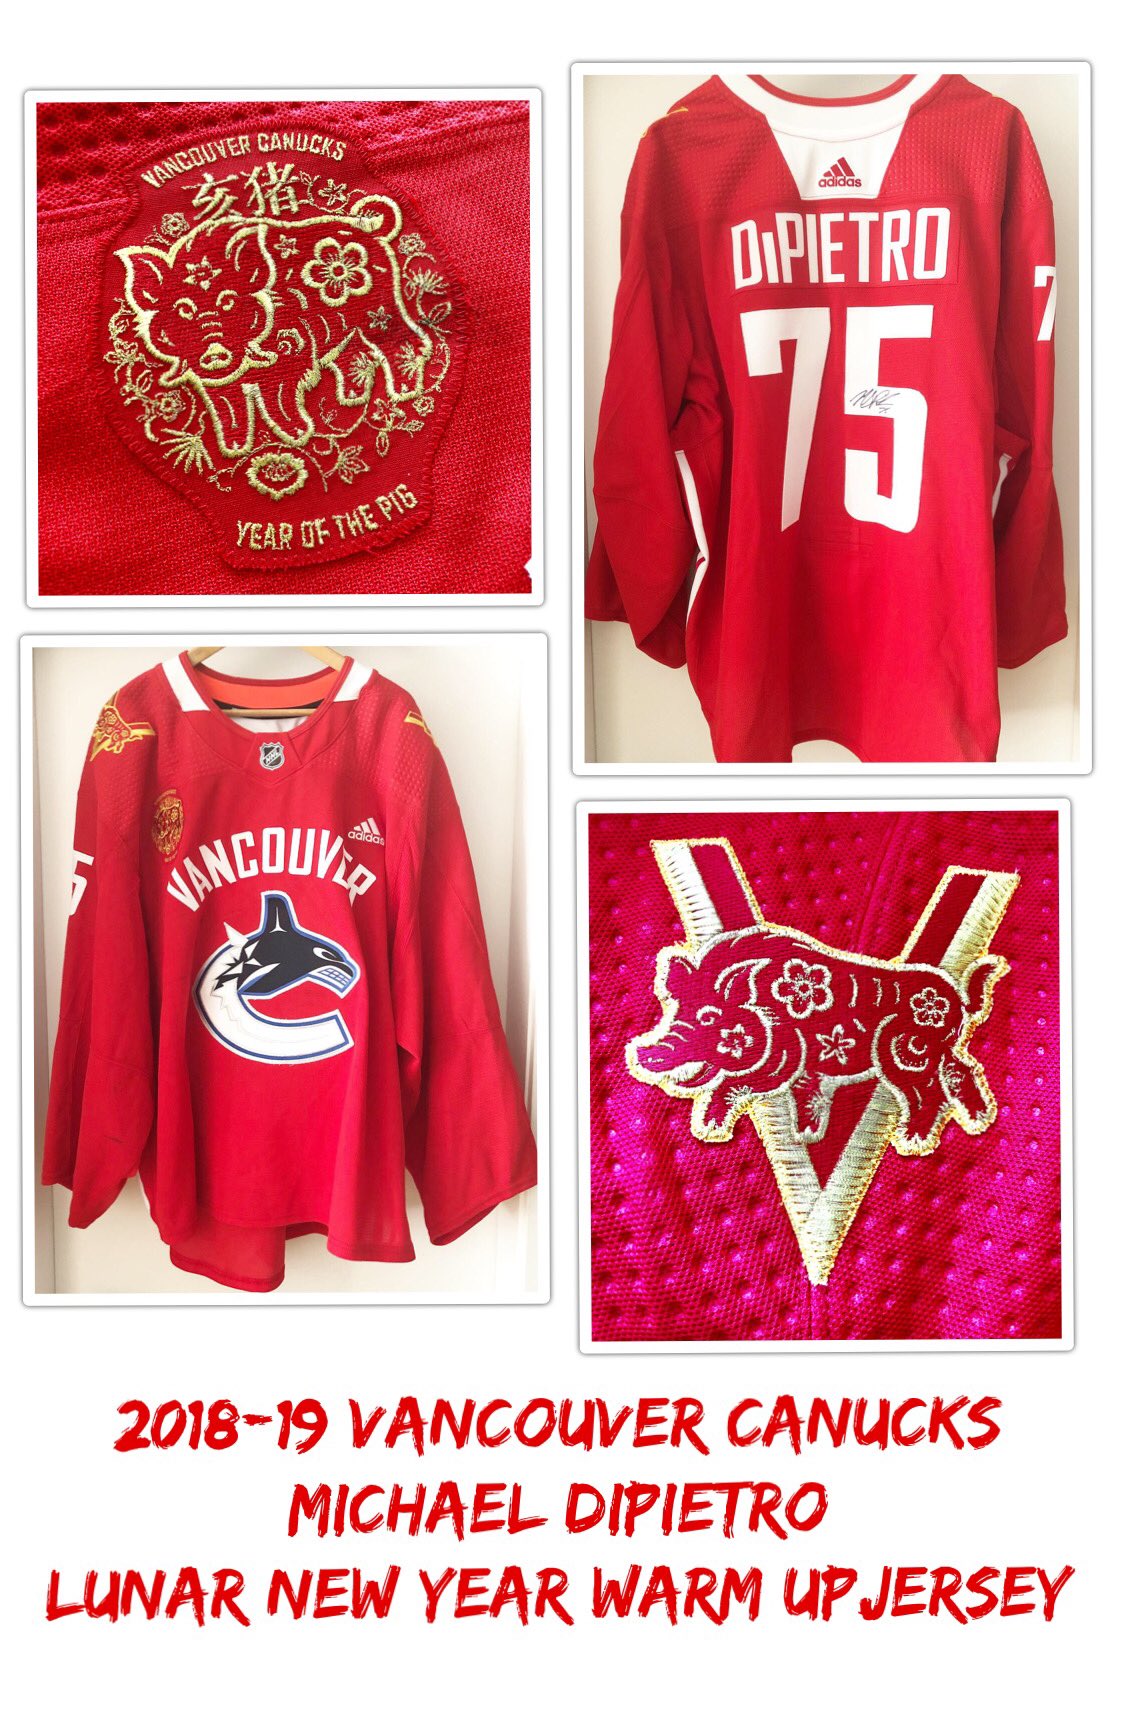 Vancouver Canucks on X: Special #Canucks Lunar New Year warm-up